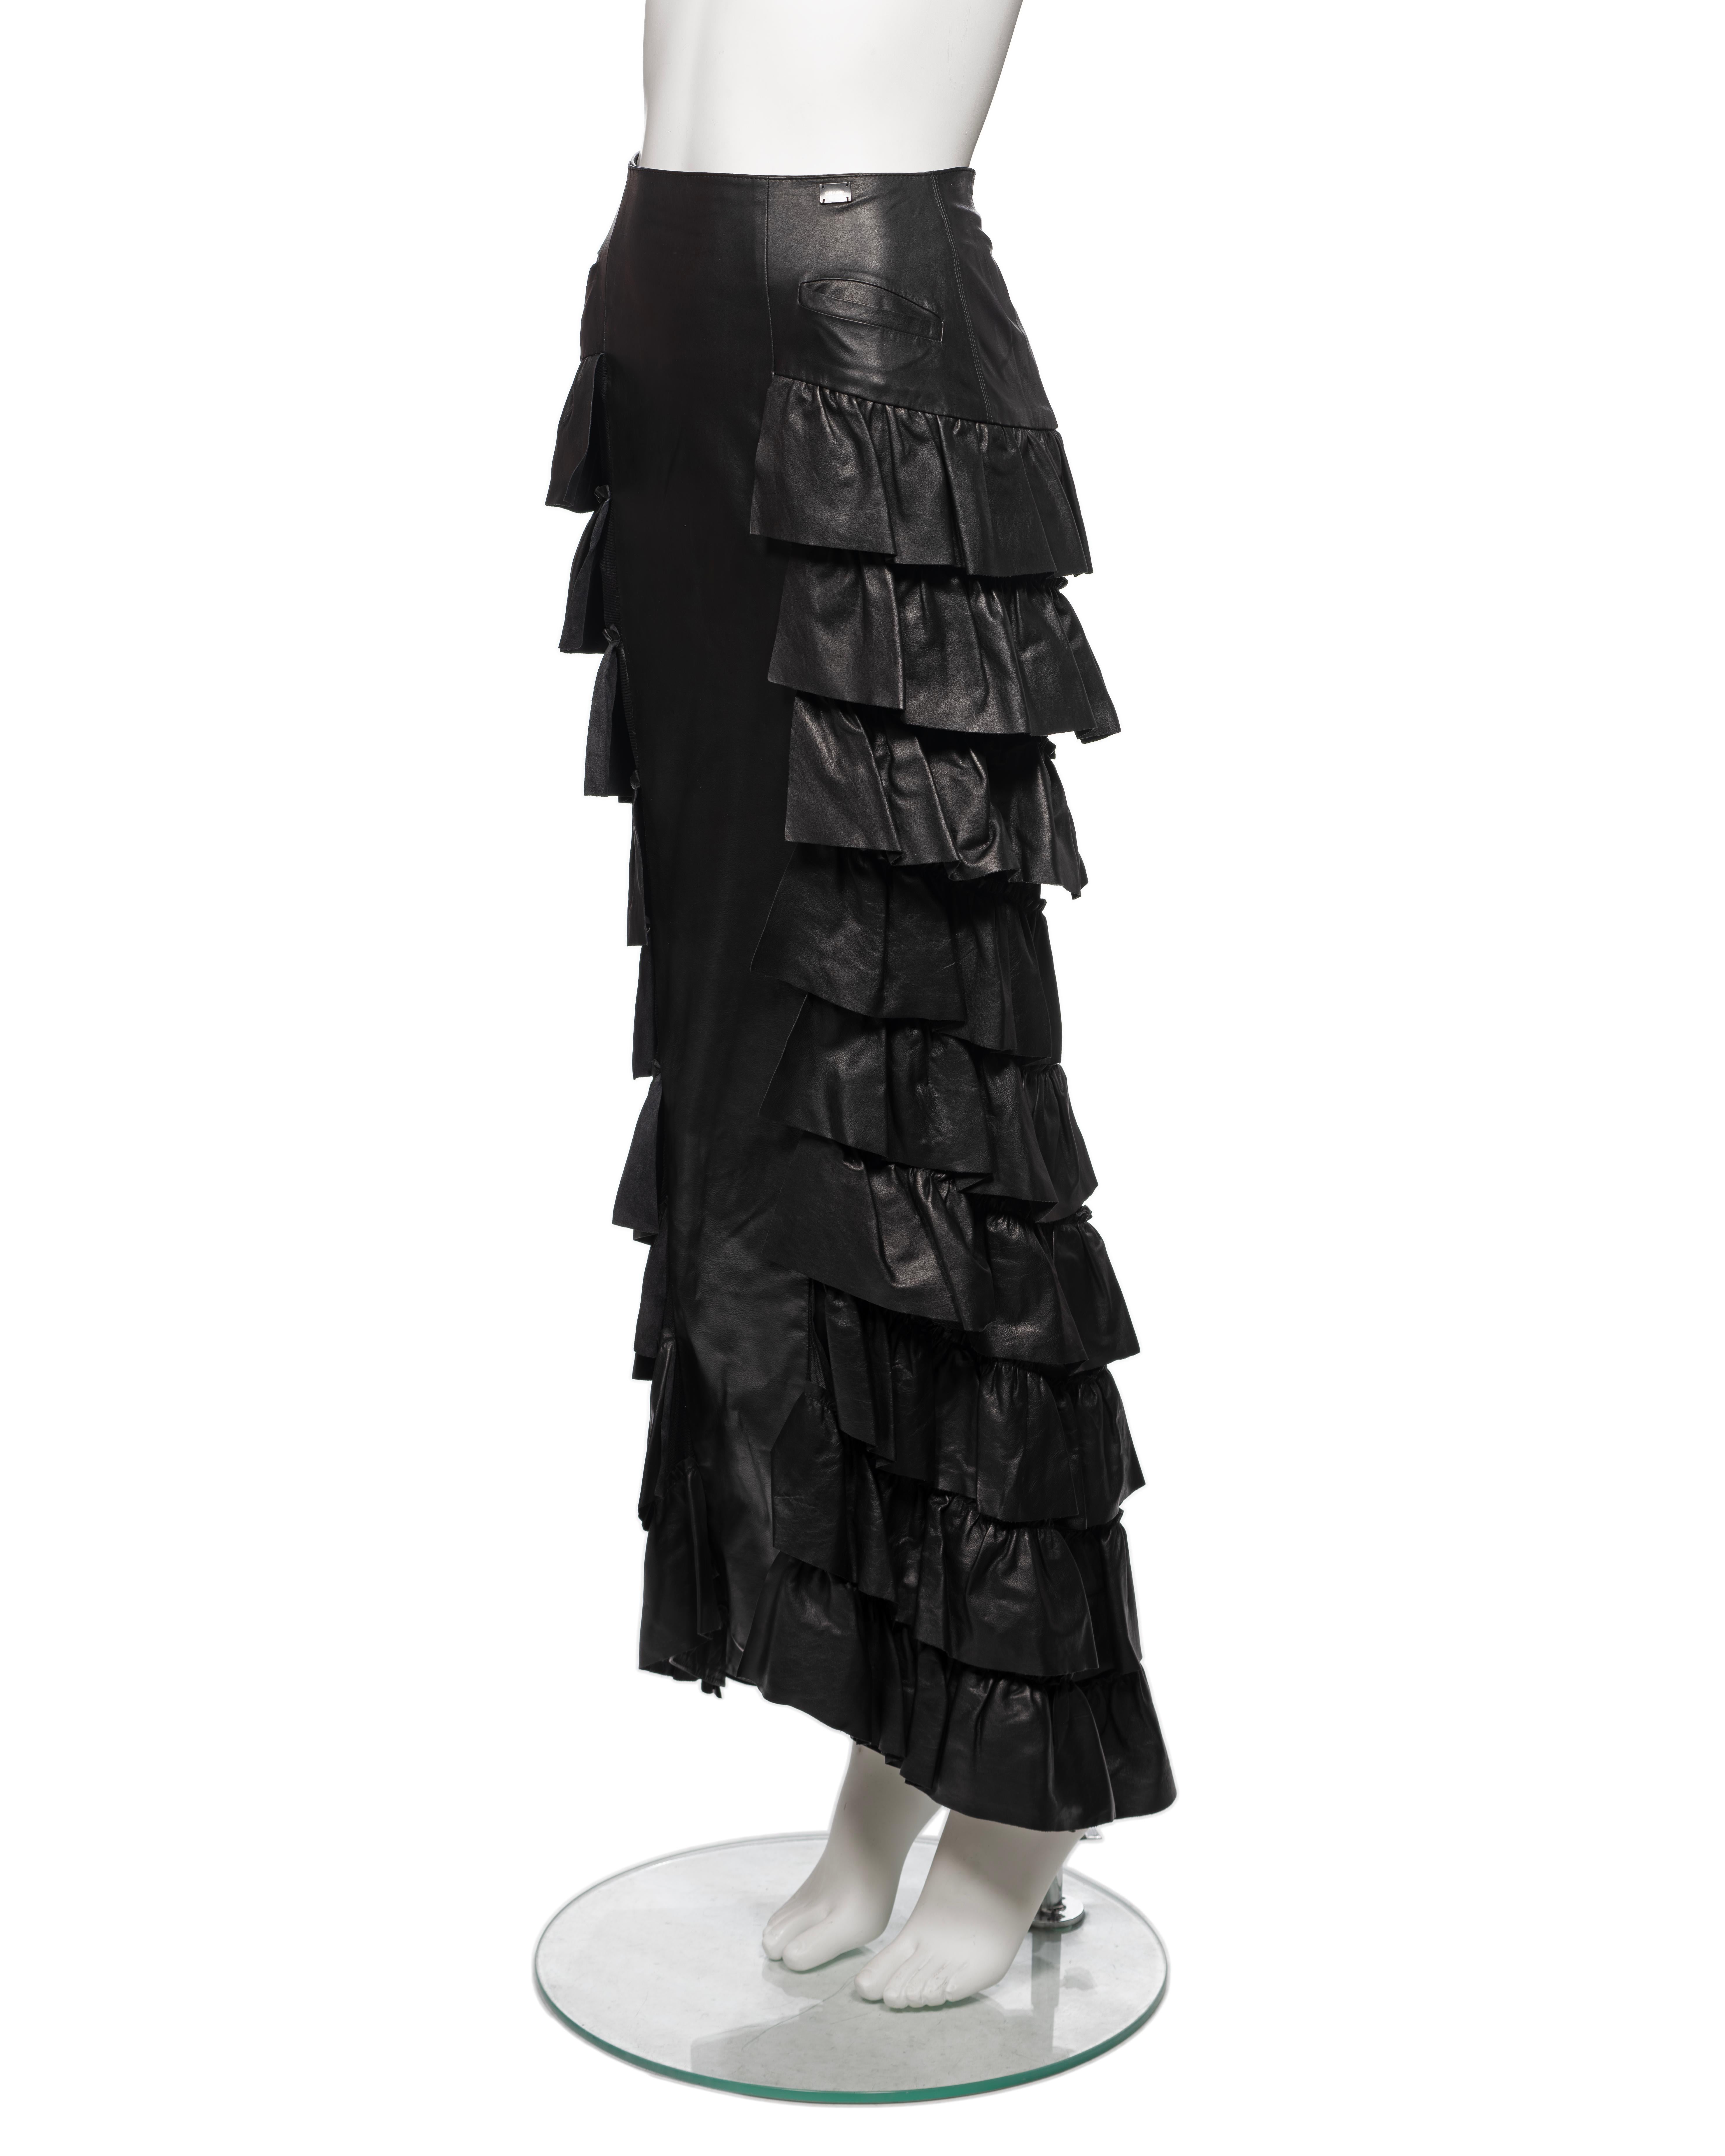 Chanel by Karl Lagerfeld Black Leather Tiered Ruffled Maxi Skirt, FW 2001 For Sale 9